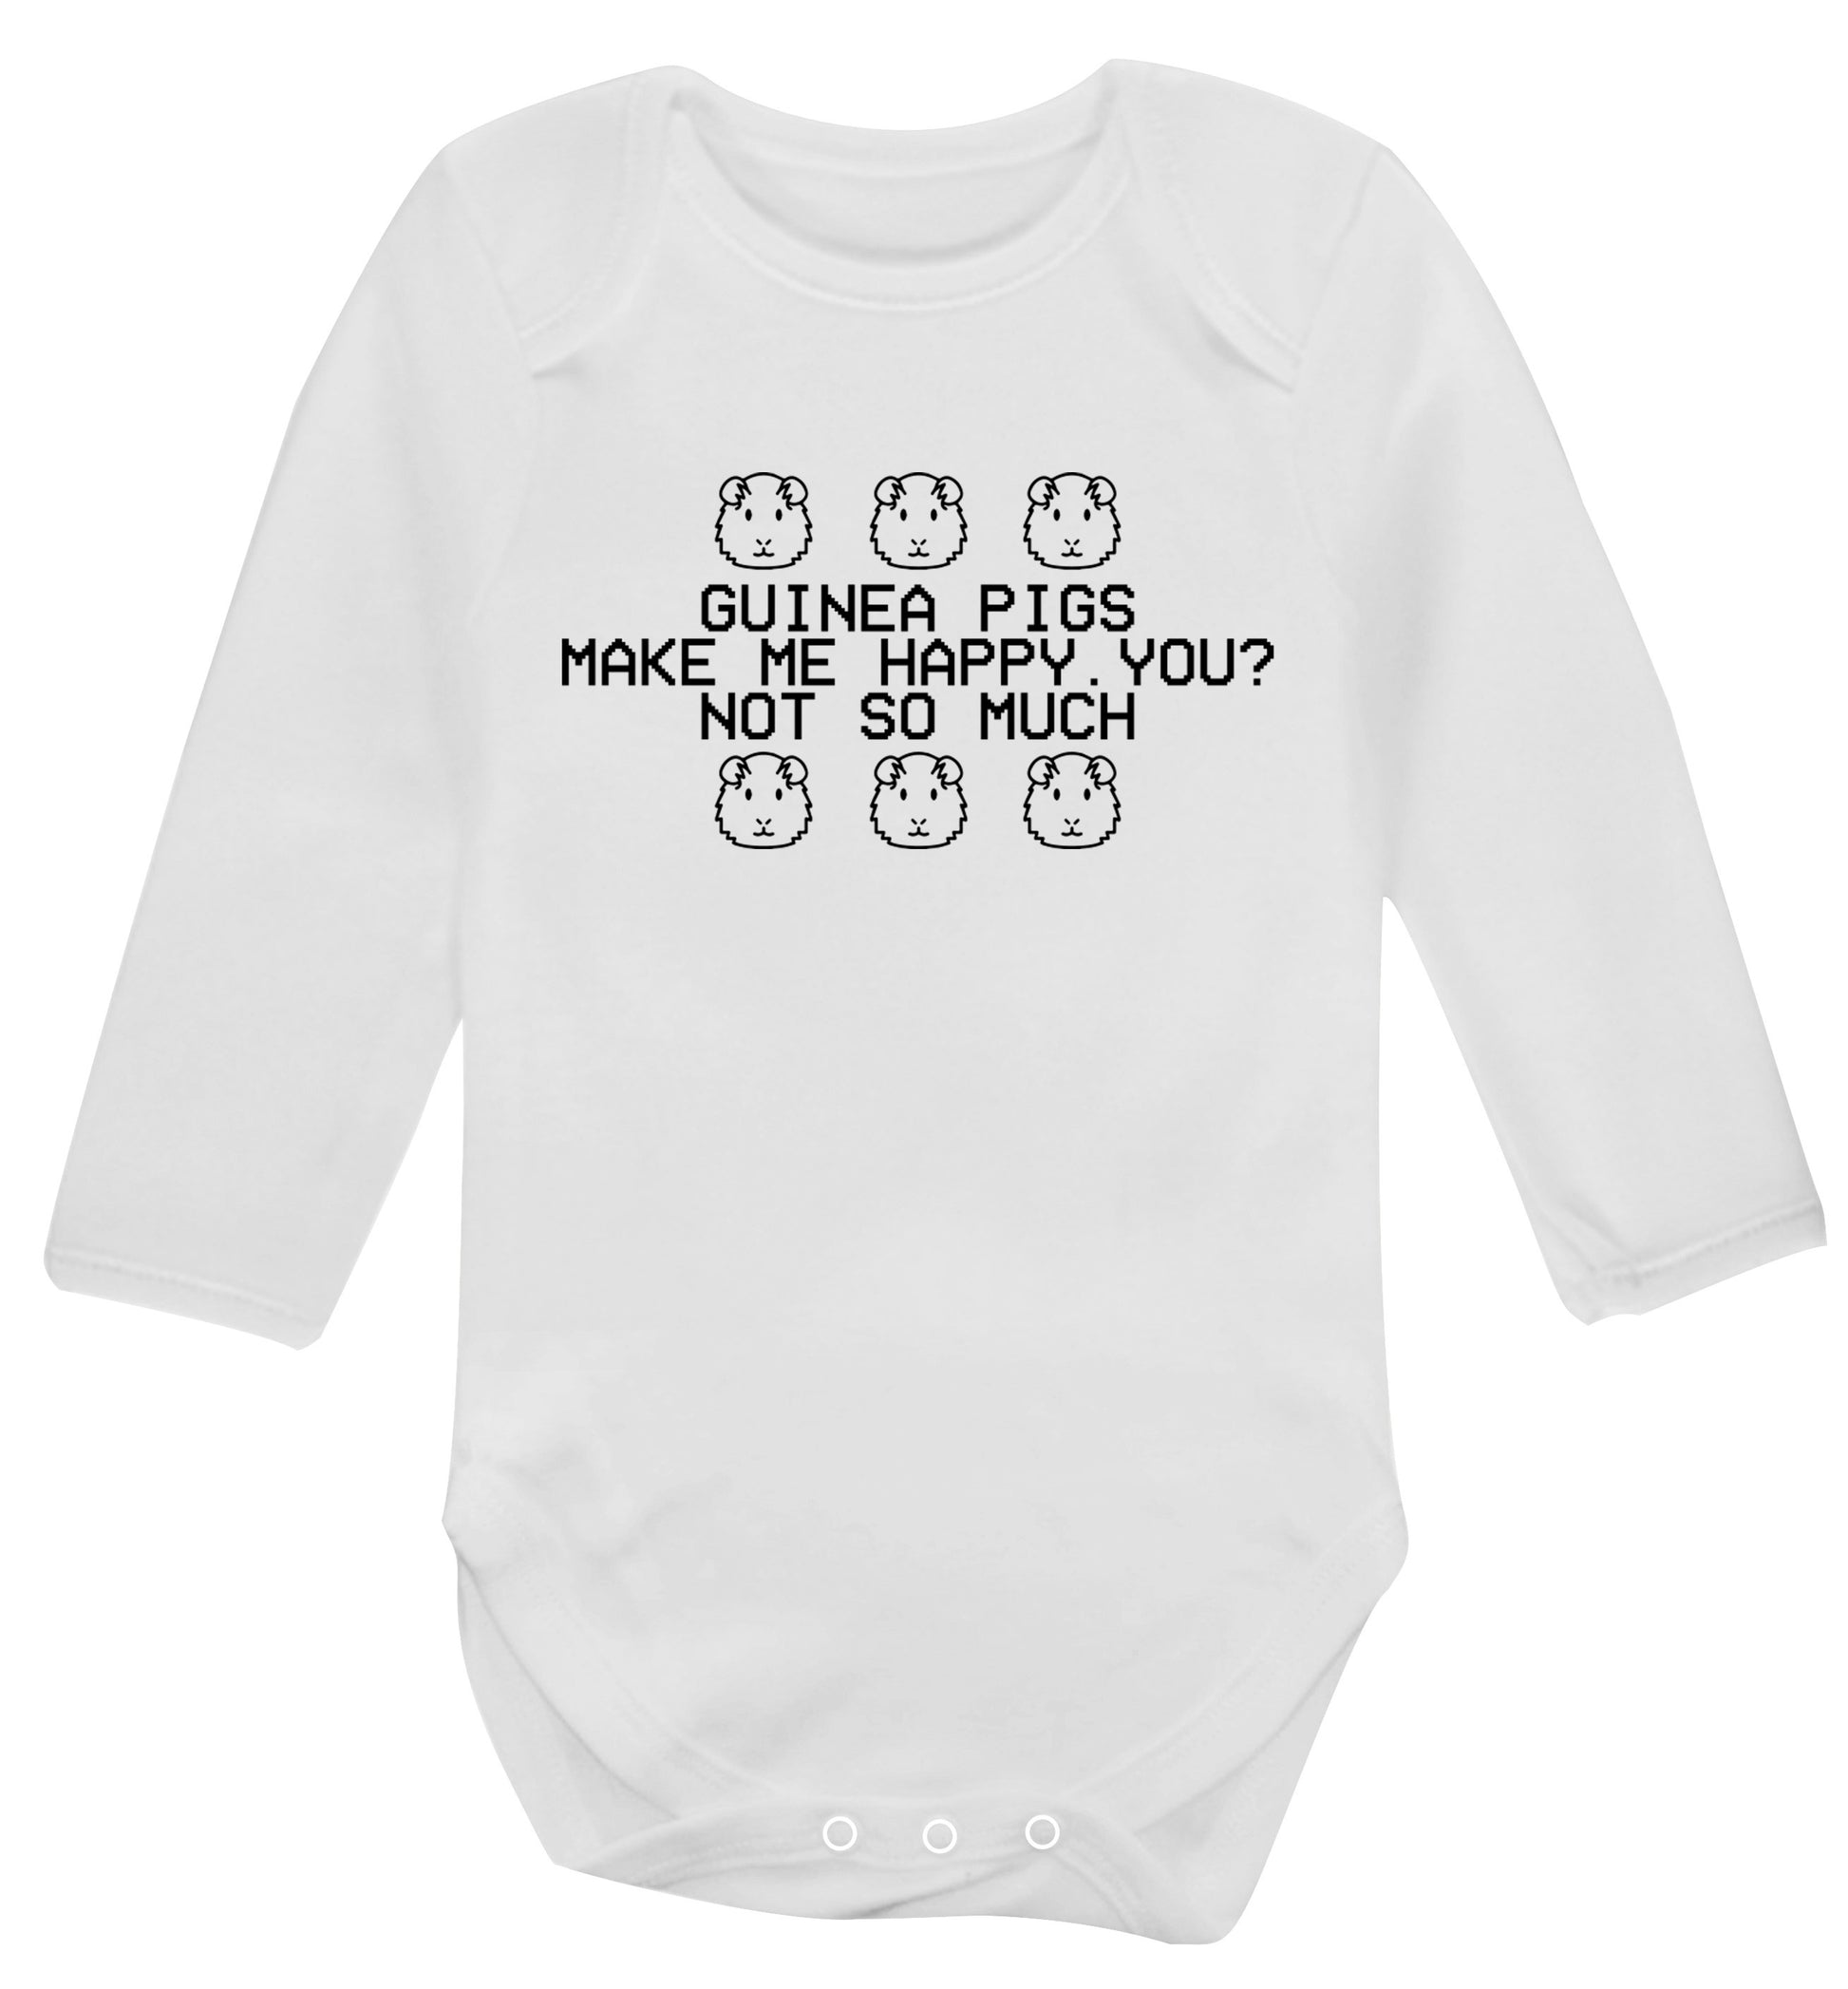 Guinea pigs make me happy, you not so much Baby Vest long sleeved white 6-12 months